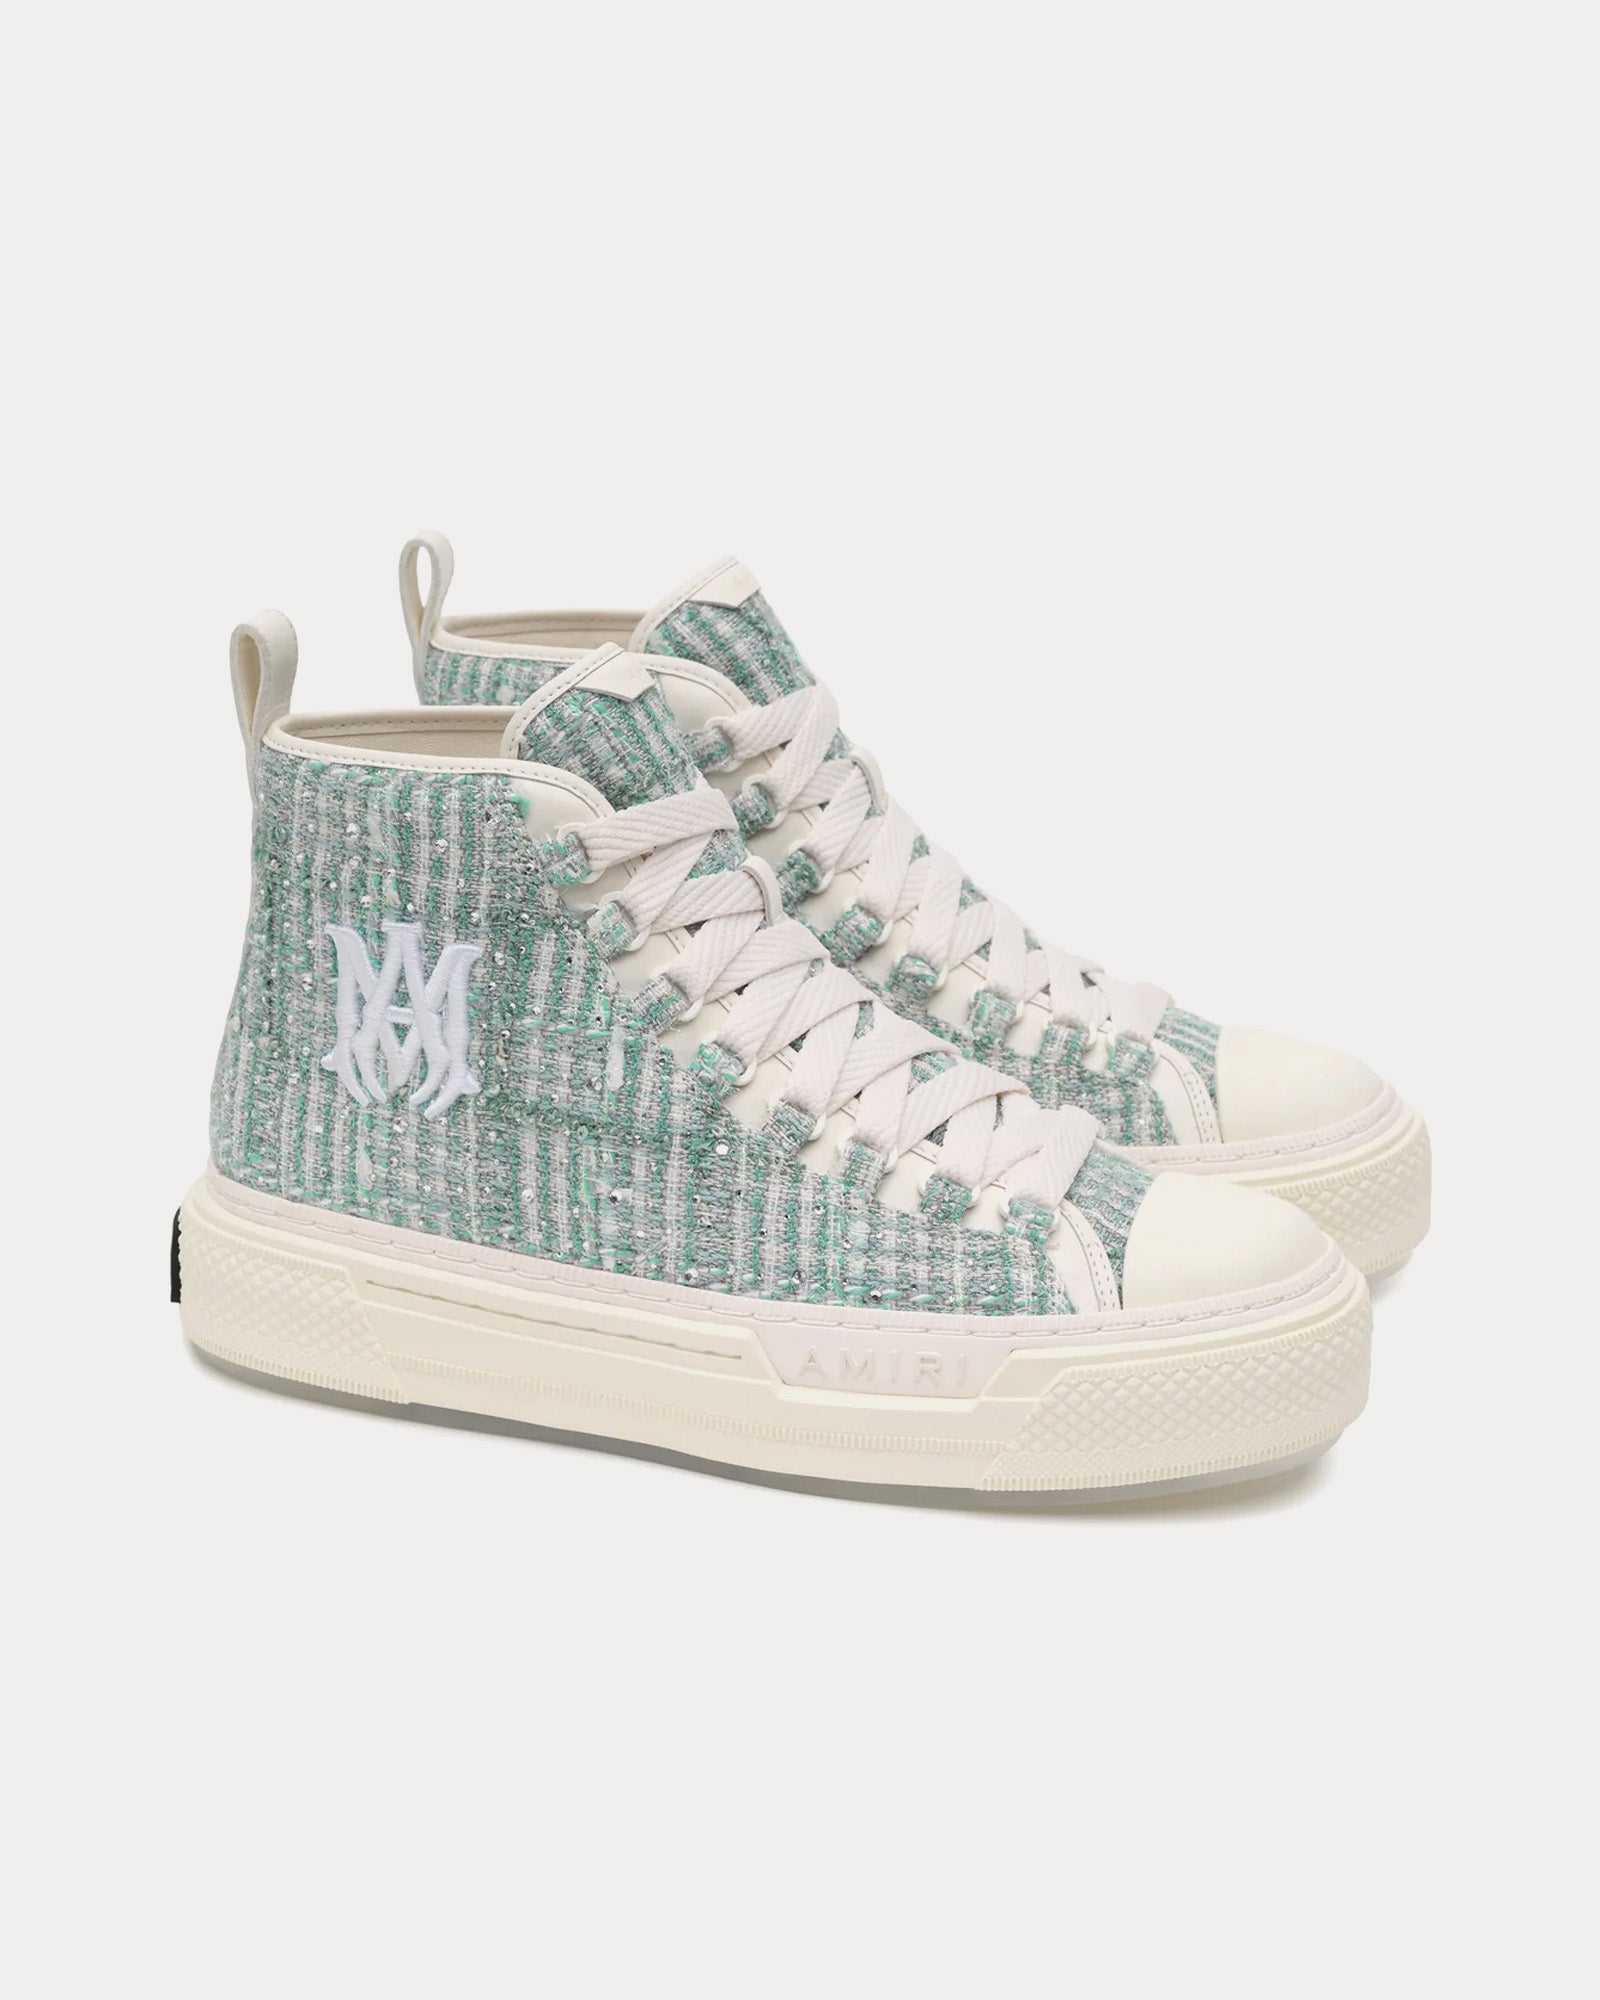 AMIRI - MA Court Boucle Crystal Grey High Top Sneakers